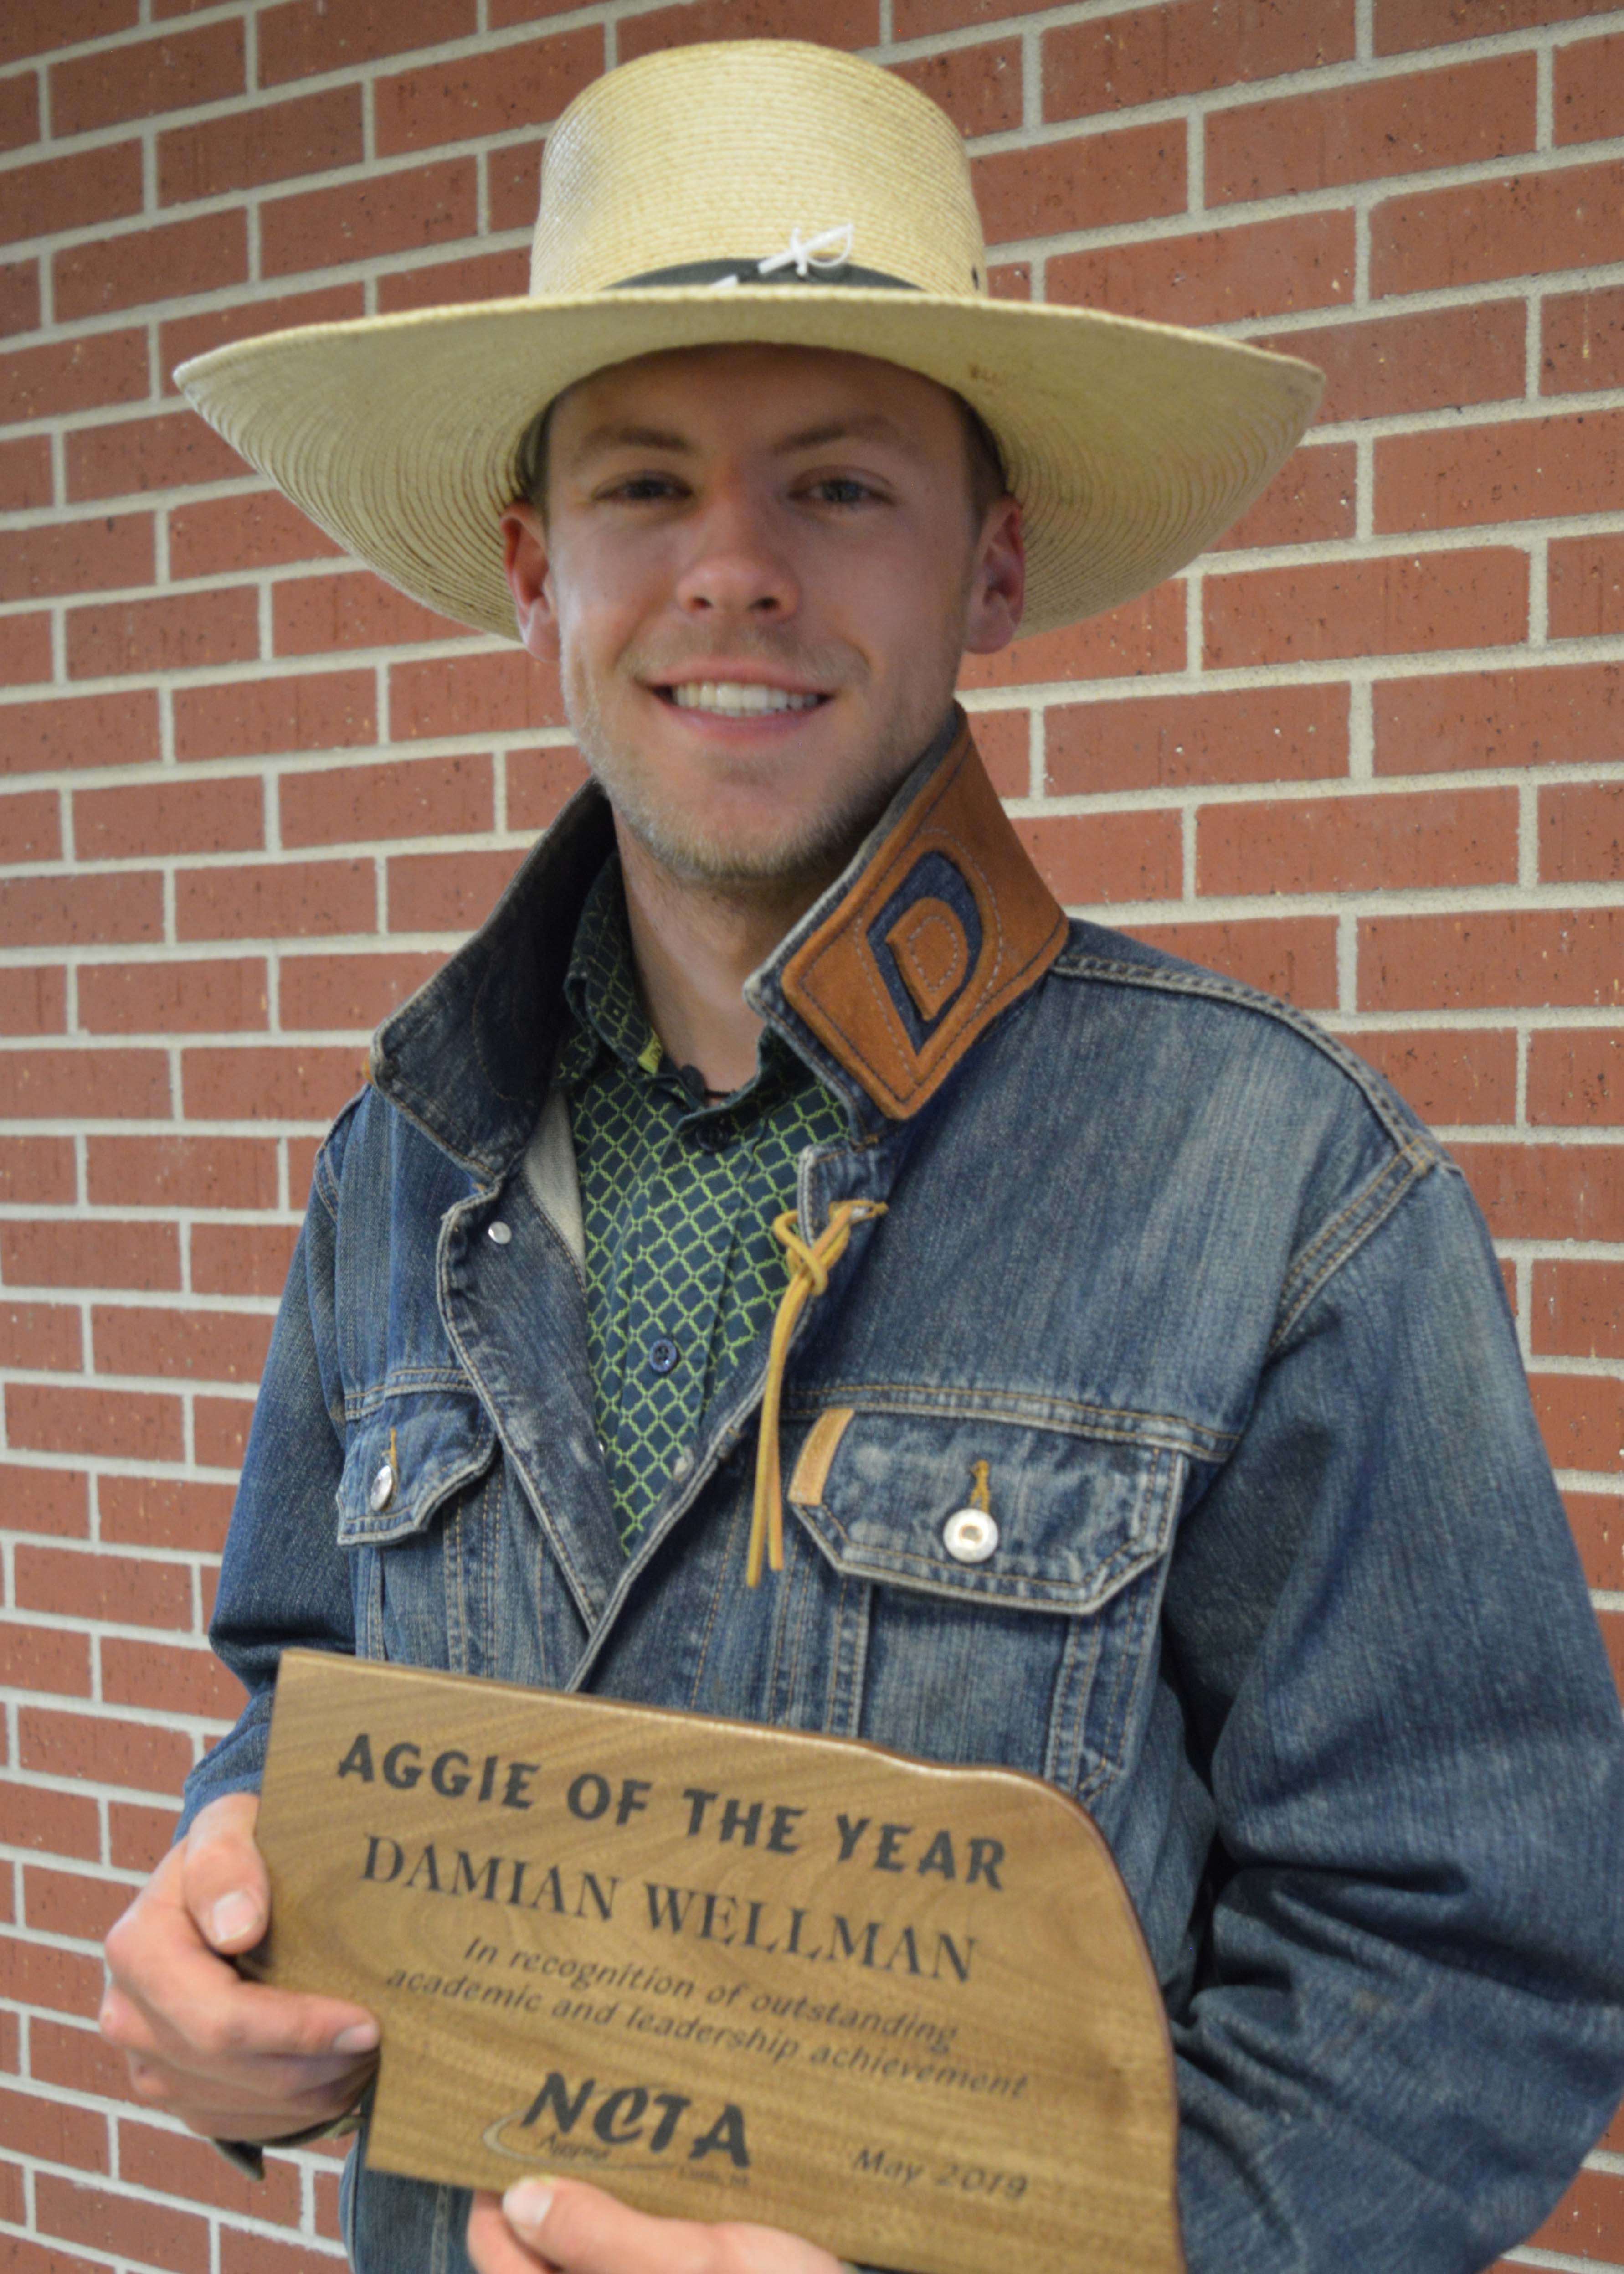 Damiann Wellman of Prairie View, Kansas, was named the 2019 Aggie of the Year. He is a livestock management major. (Crawford/NCTA News)